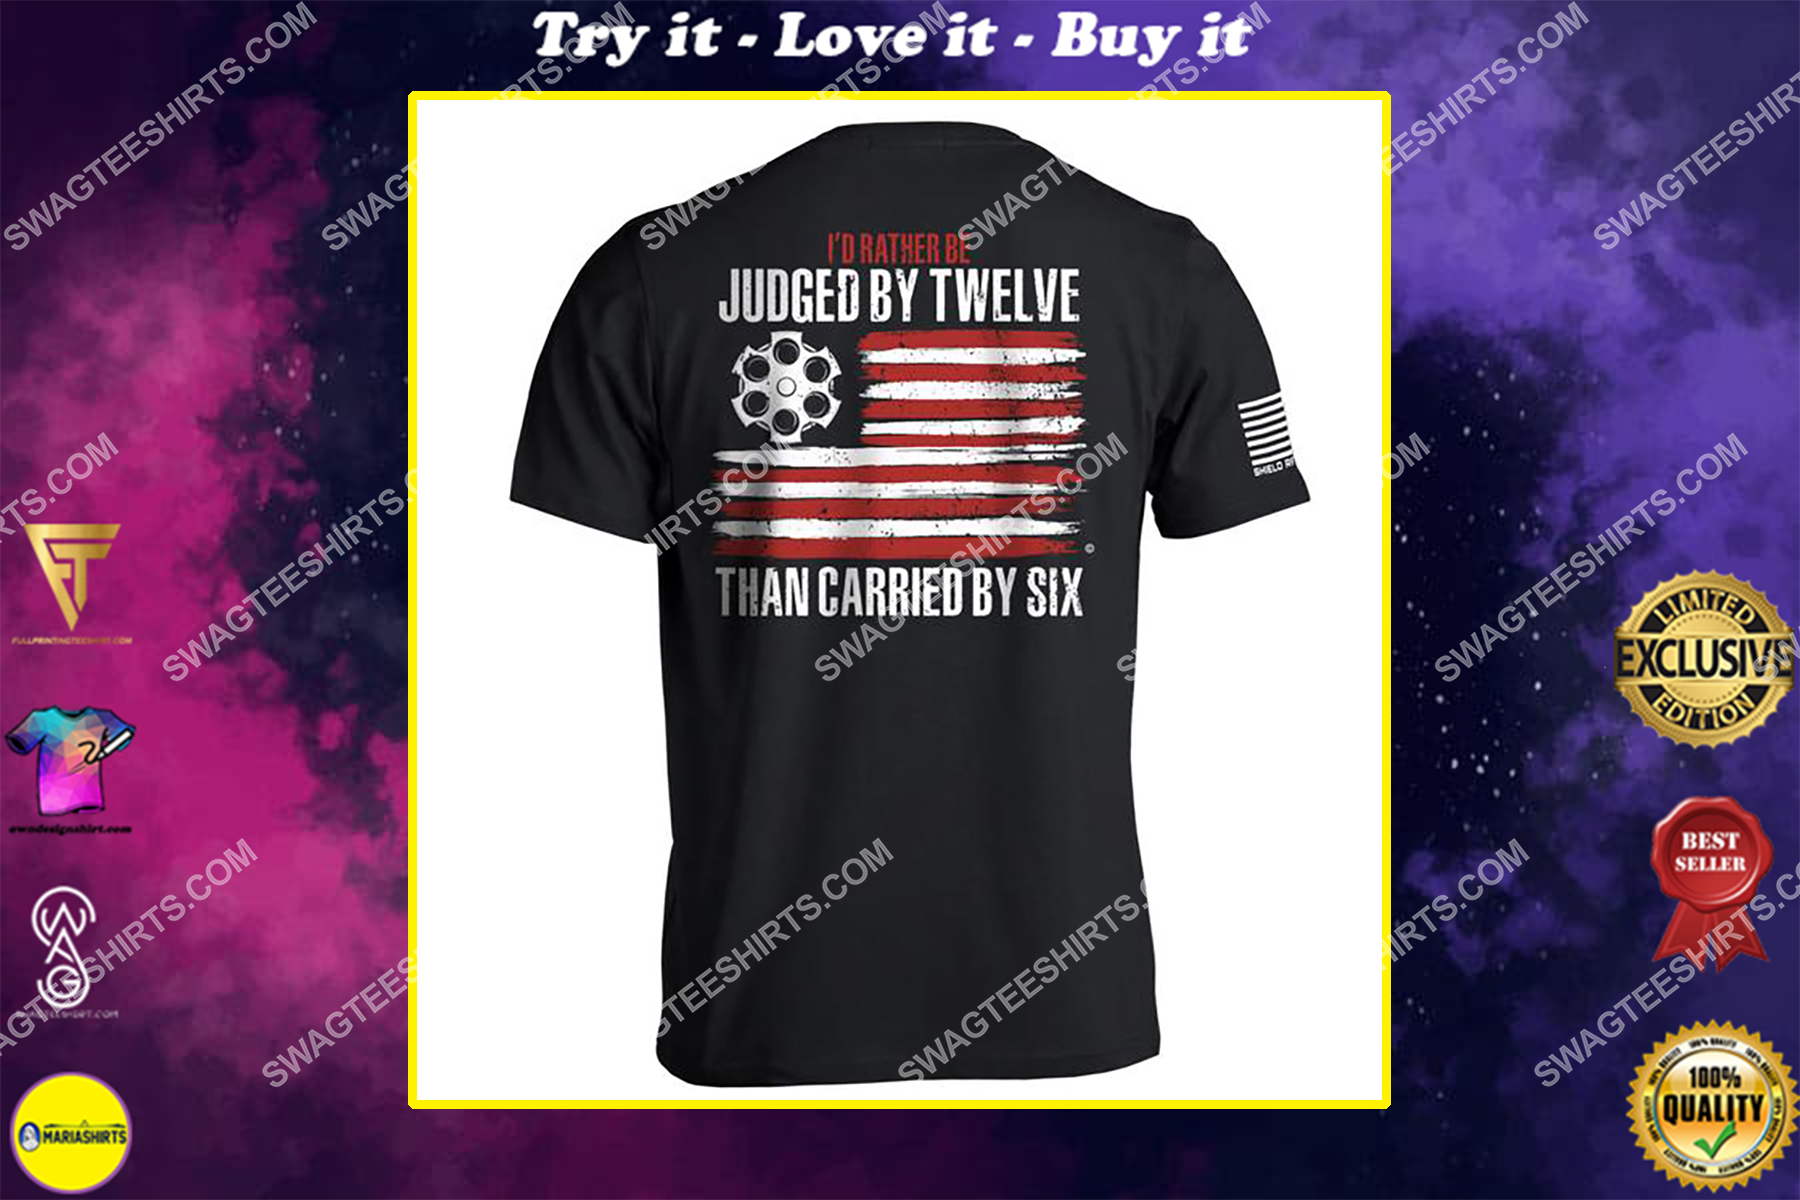 i'd rather be judged by twelve than carried by six gun control political shirt